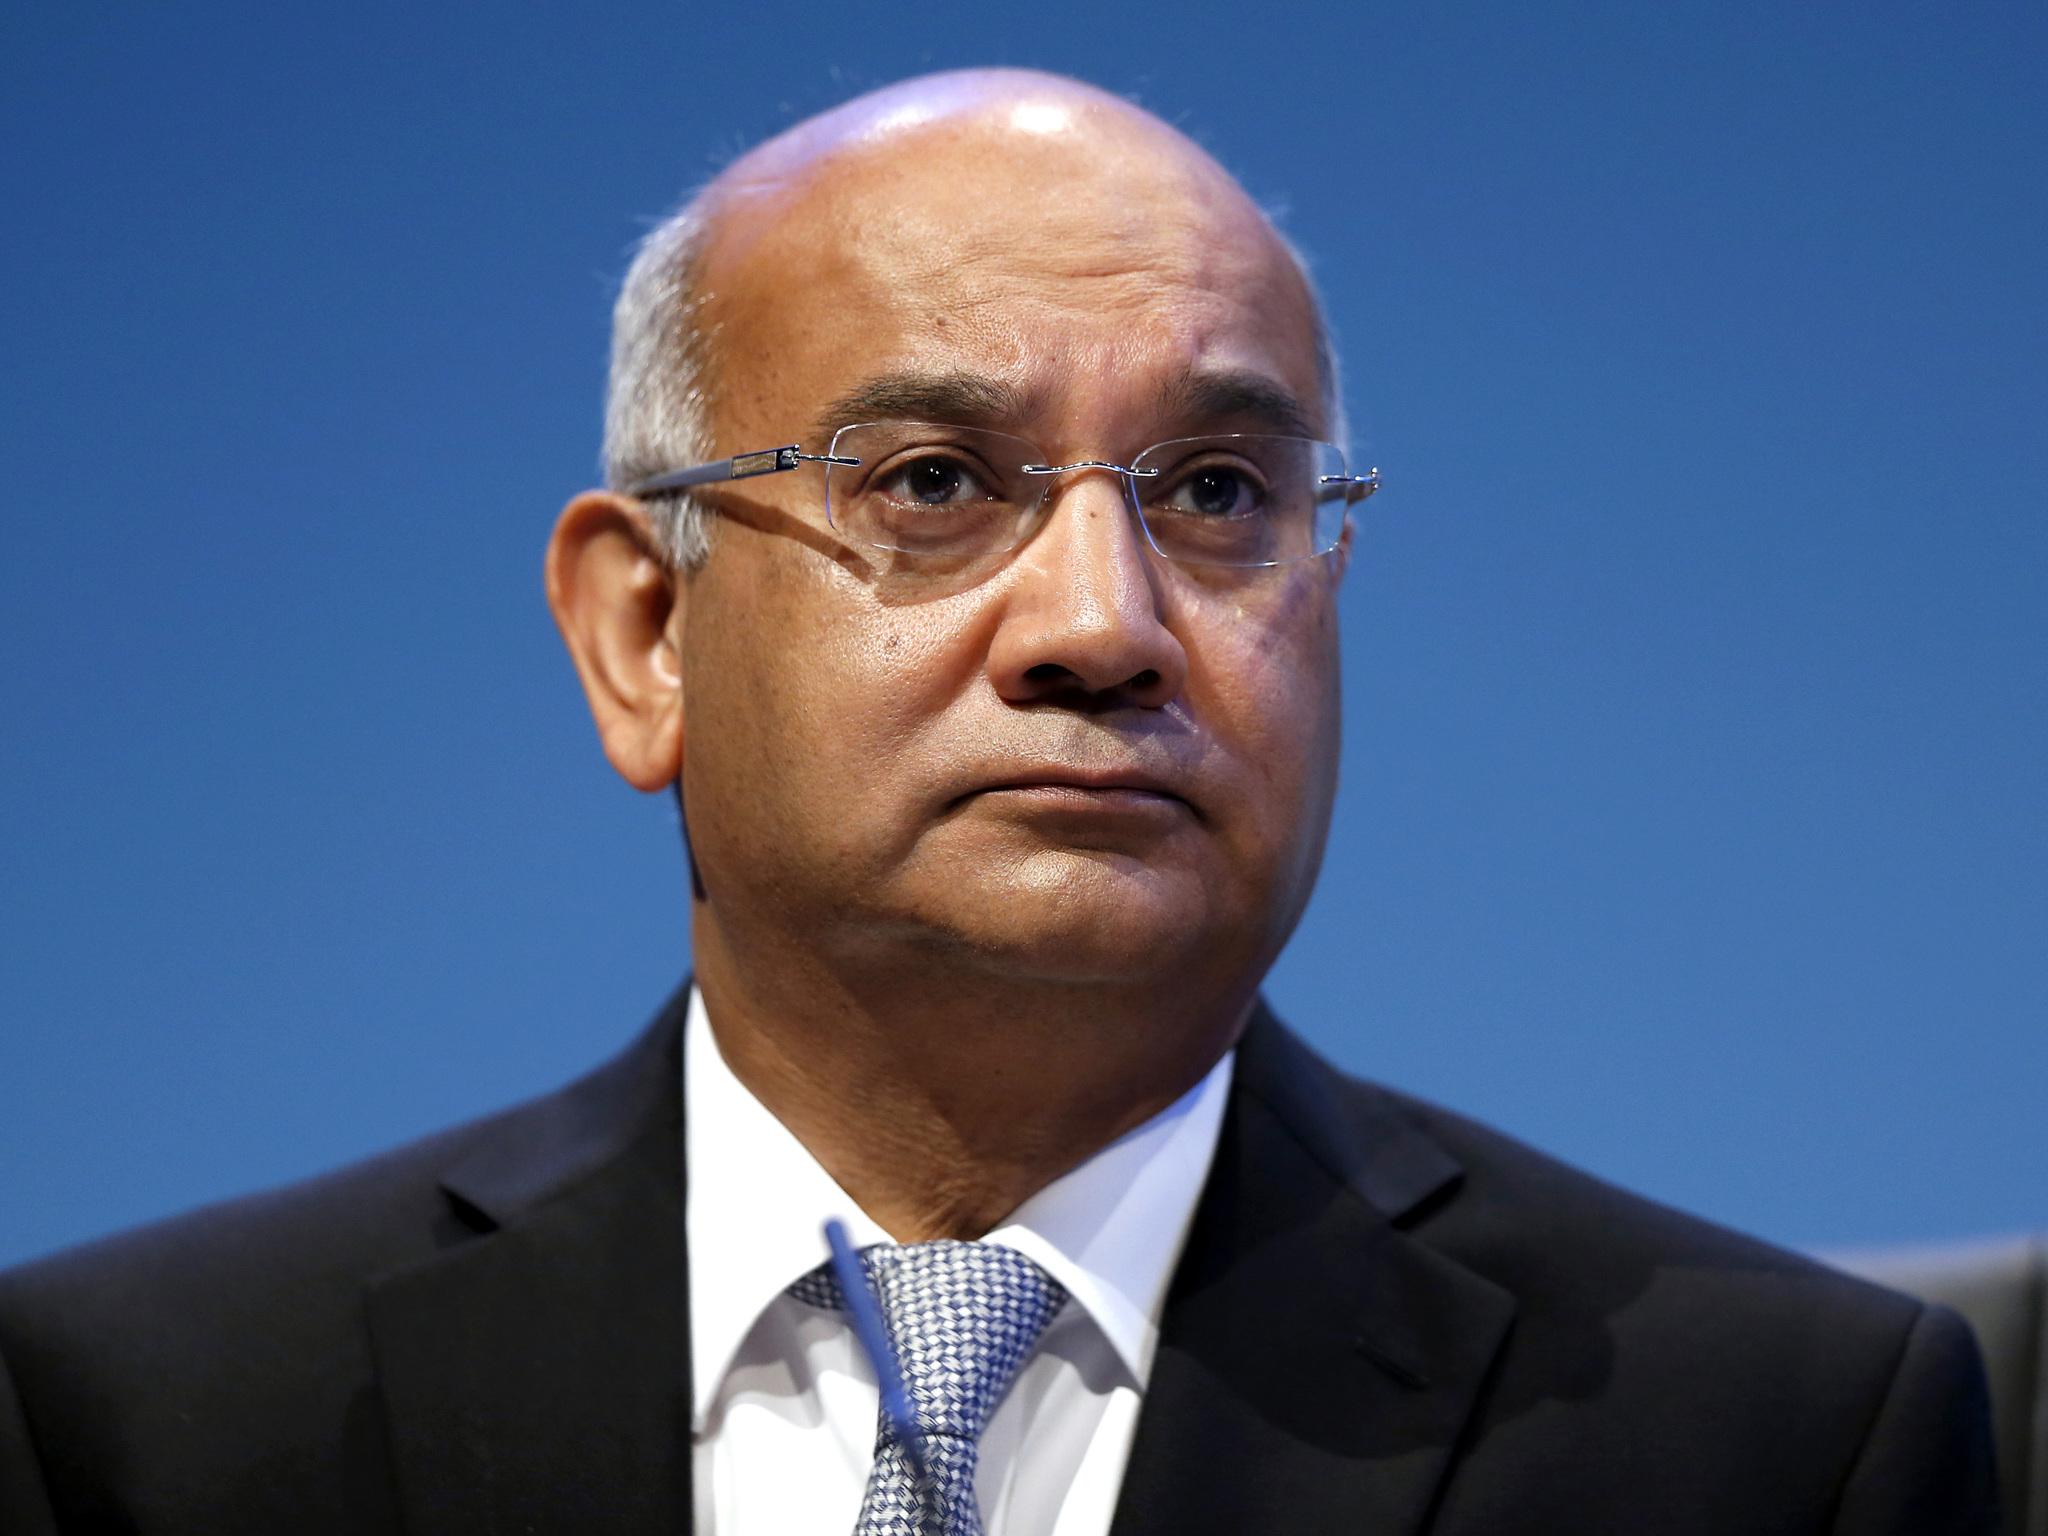 Keith Vaz is not happy about the visit